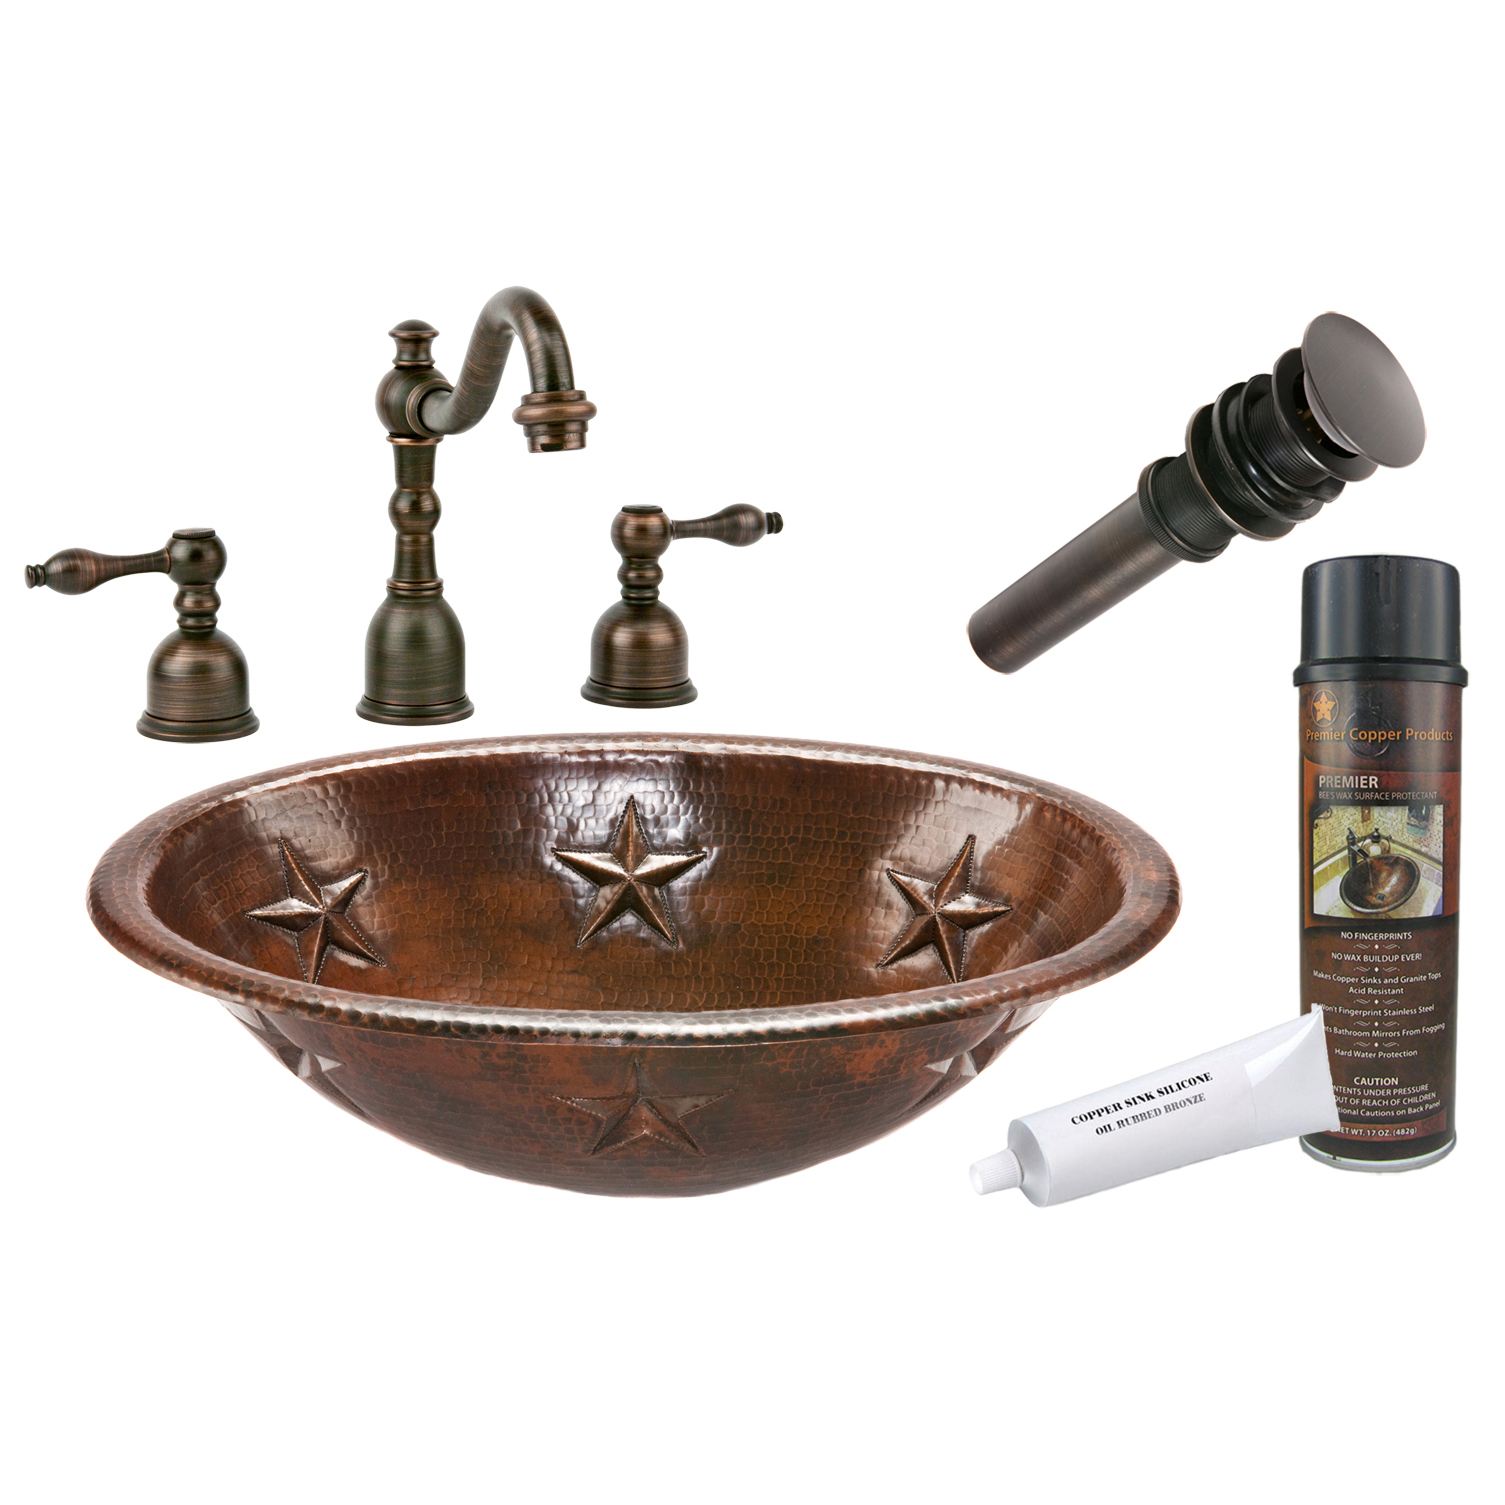 Oval Star Self Rimming Hammered Copper Sink, Faucet And Accessories Package, Oil Rubbed Bronze